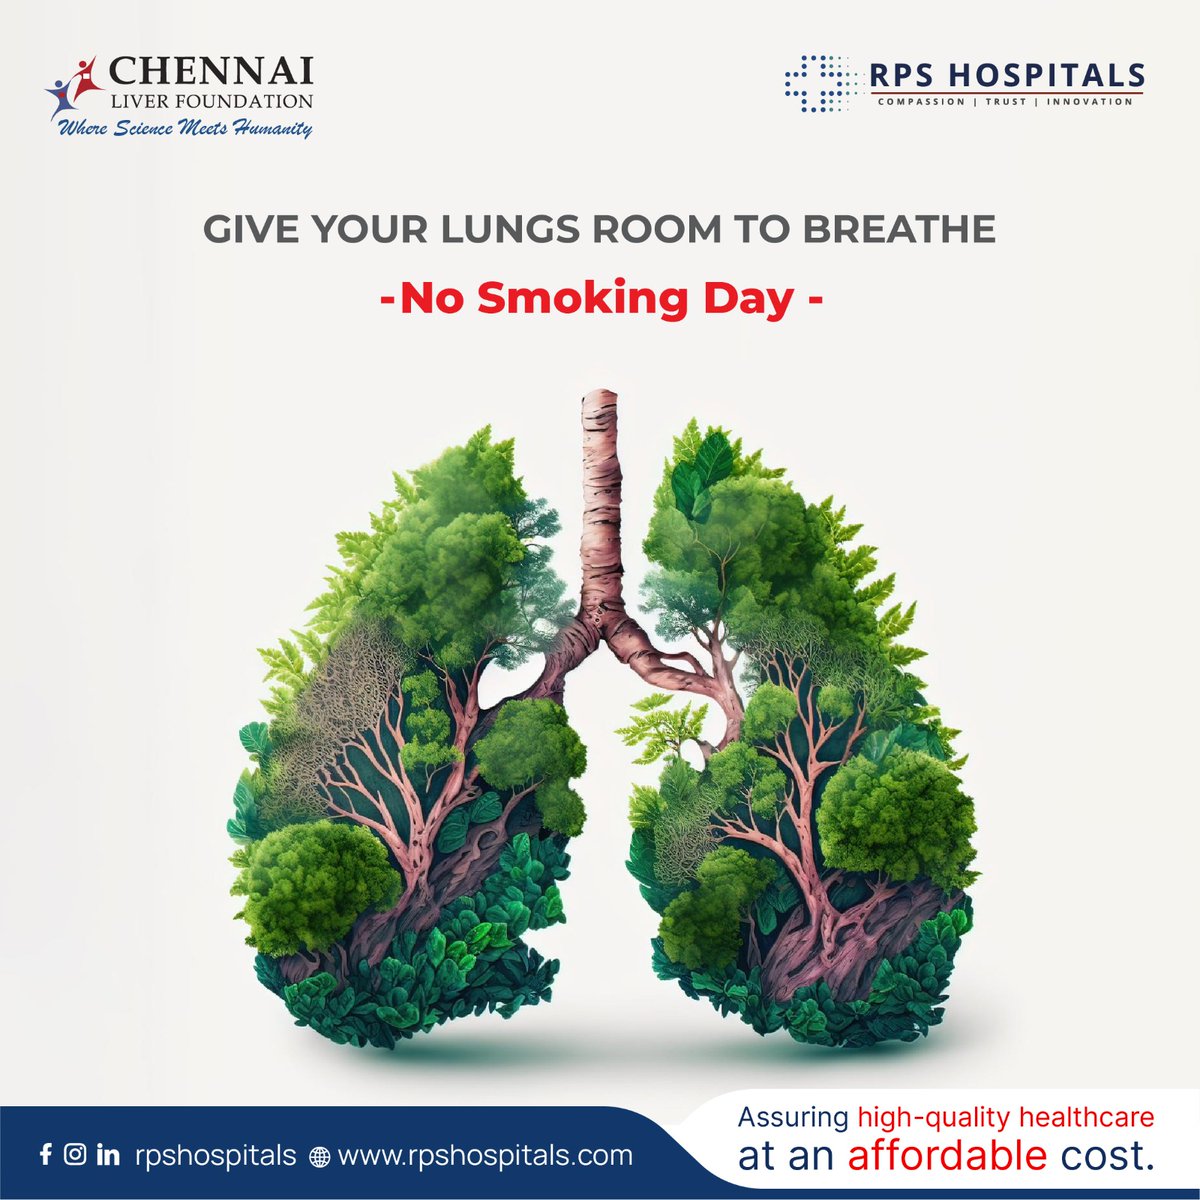 In every breath you take, your lungs tell you they aren't ashtrays. 
They deserve clean air, not the toxic residue of cigarettes. Stop smoking and start living.

No Smoking Day

#RPS #CLF #nosmokingday #smokinginjurioustohealth #healthylung #healthylifestyle